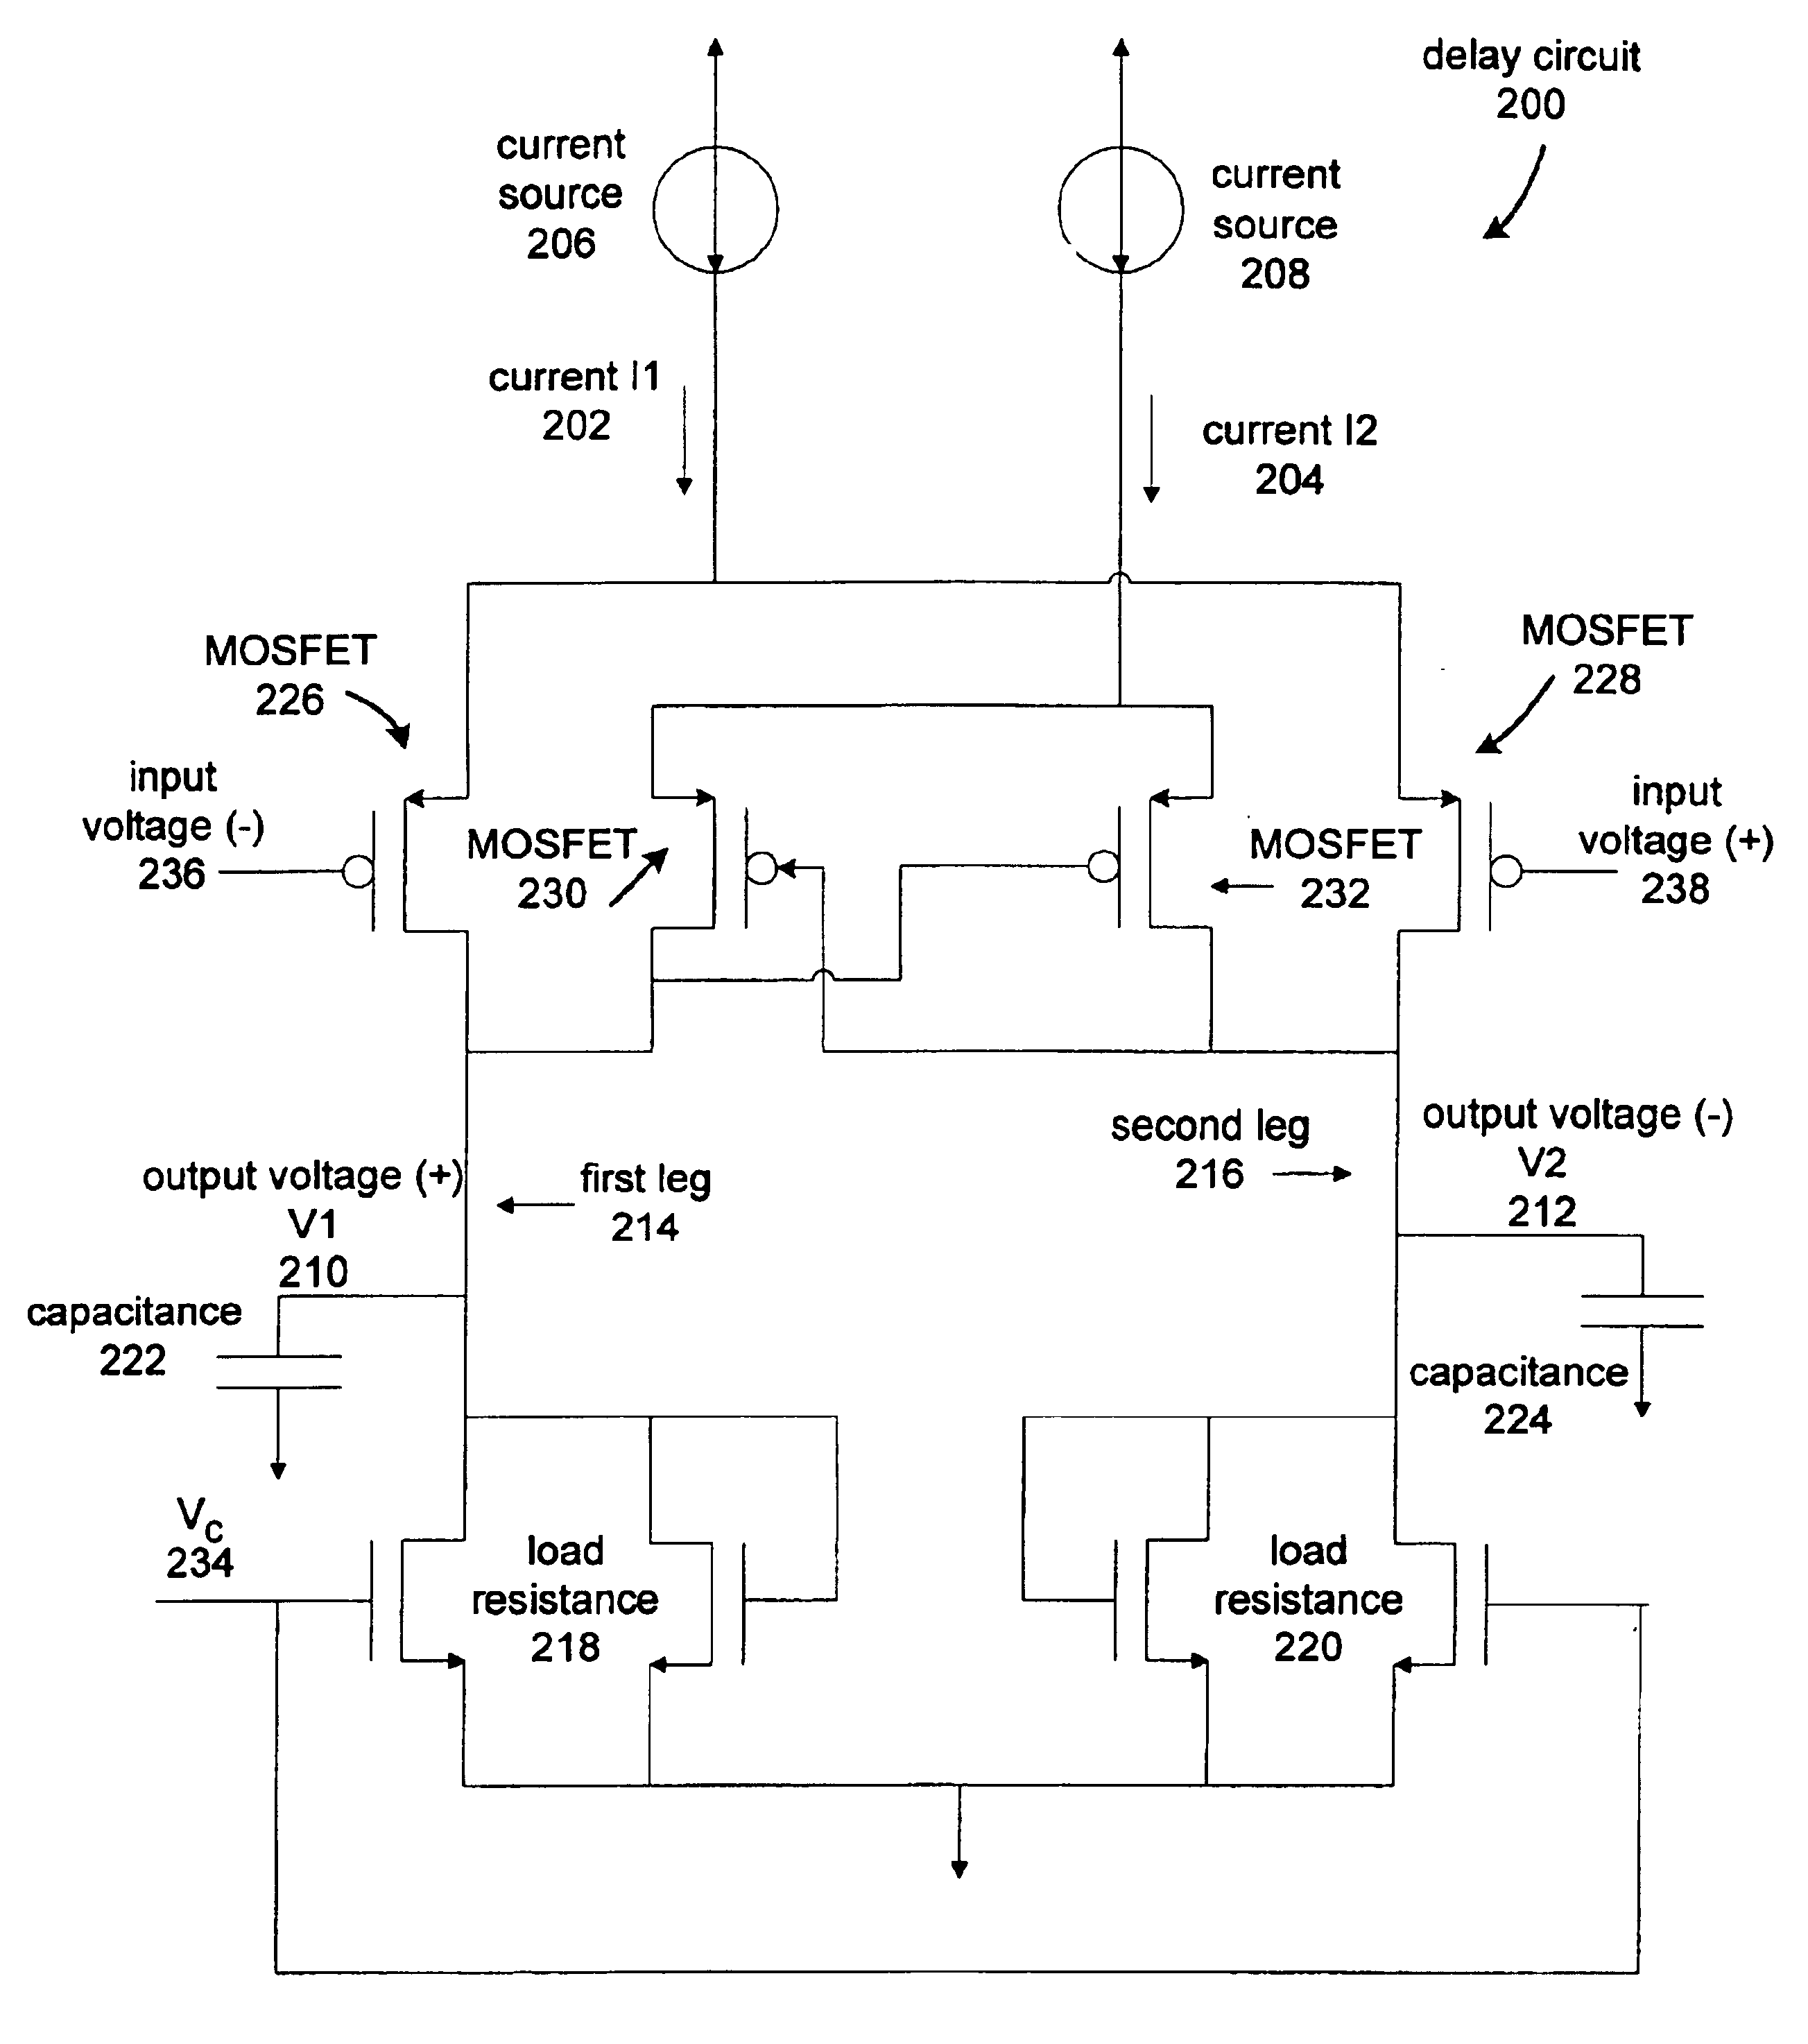 Current controlled delay circuit